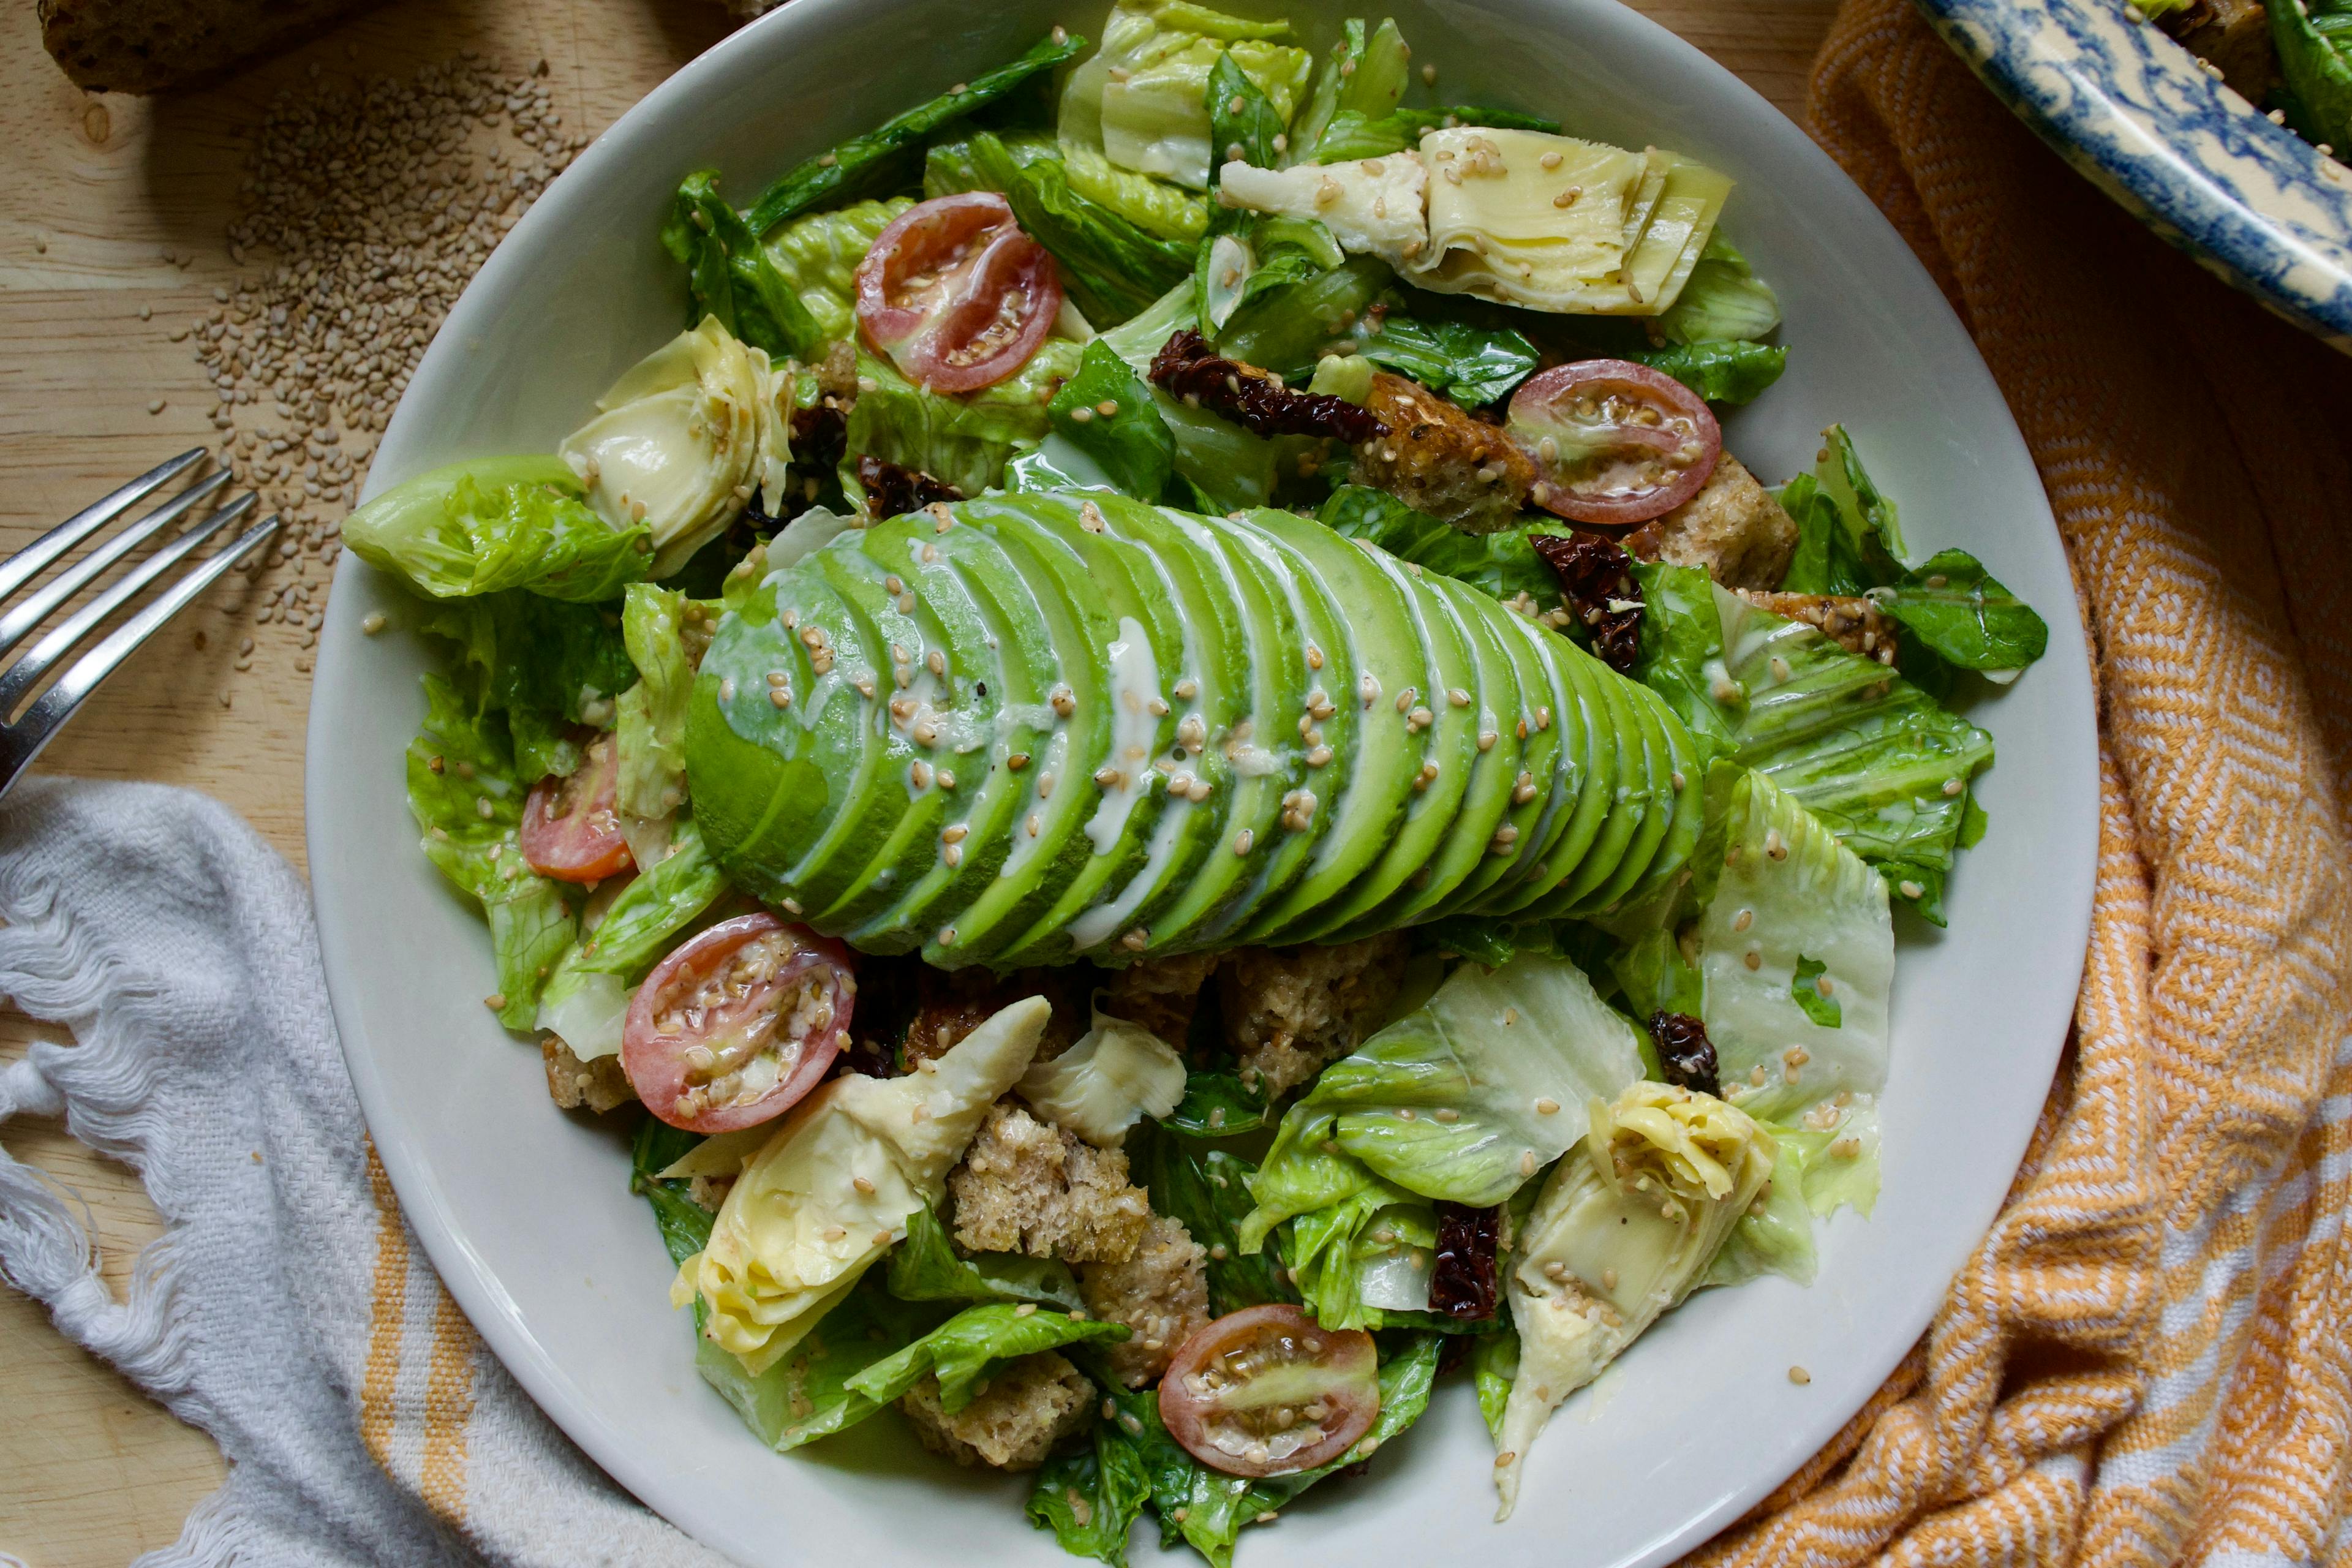 A bowl of salad with tomatoes, croutons, and artichoke hearts, with a sliced half of avocado on top.